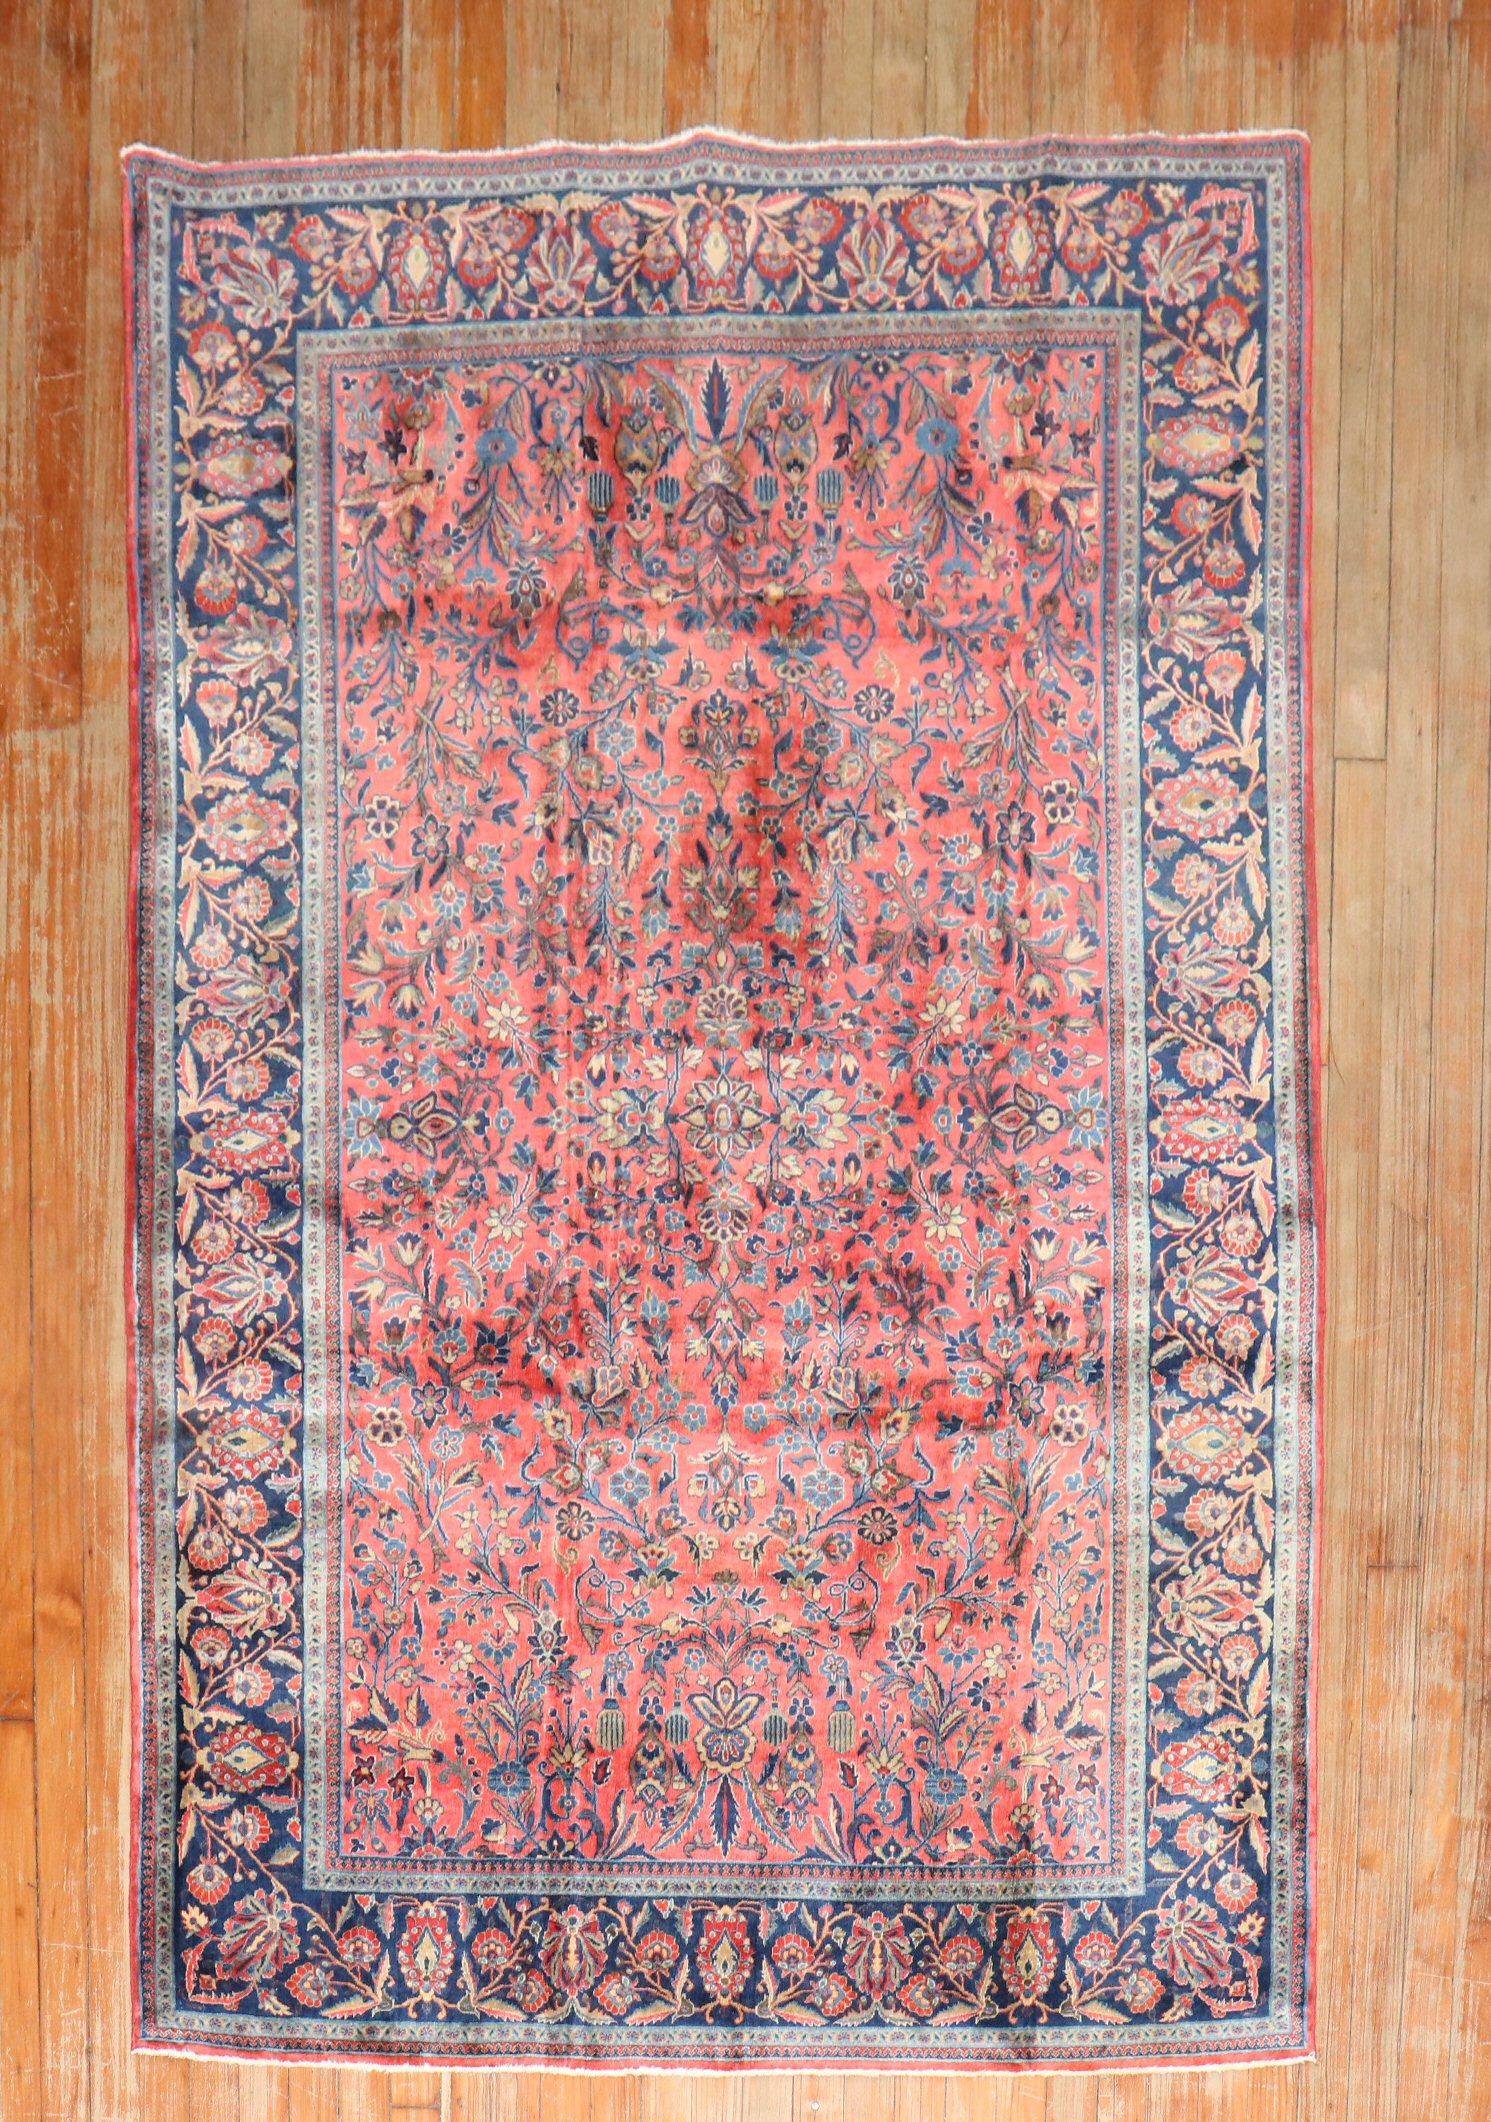 Beautiful Persian Kashan Accent size hand-woven with manchester wool in the prettiest reds and blues

Measures: 4'5” x 6'7”

The best 19th century and turn-of-the-20th century Kashan carpets, be they of the Manchester wool type or the Mohtasham